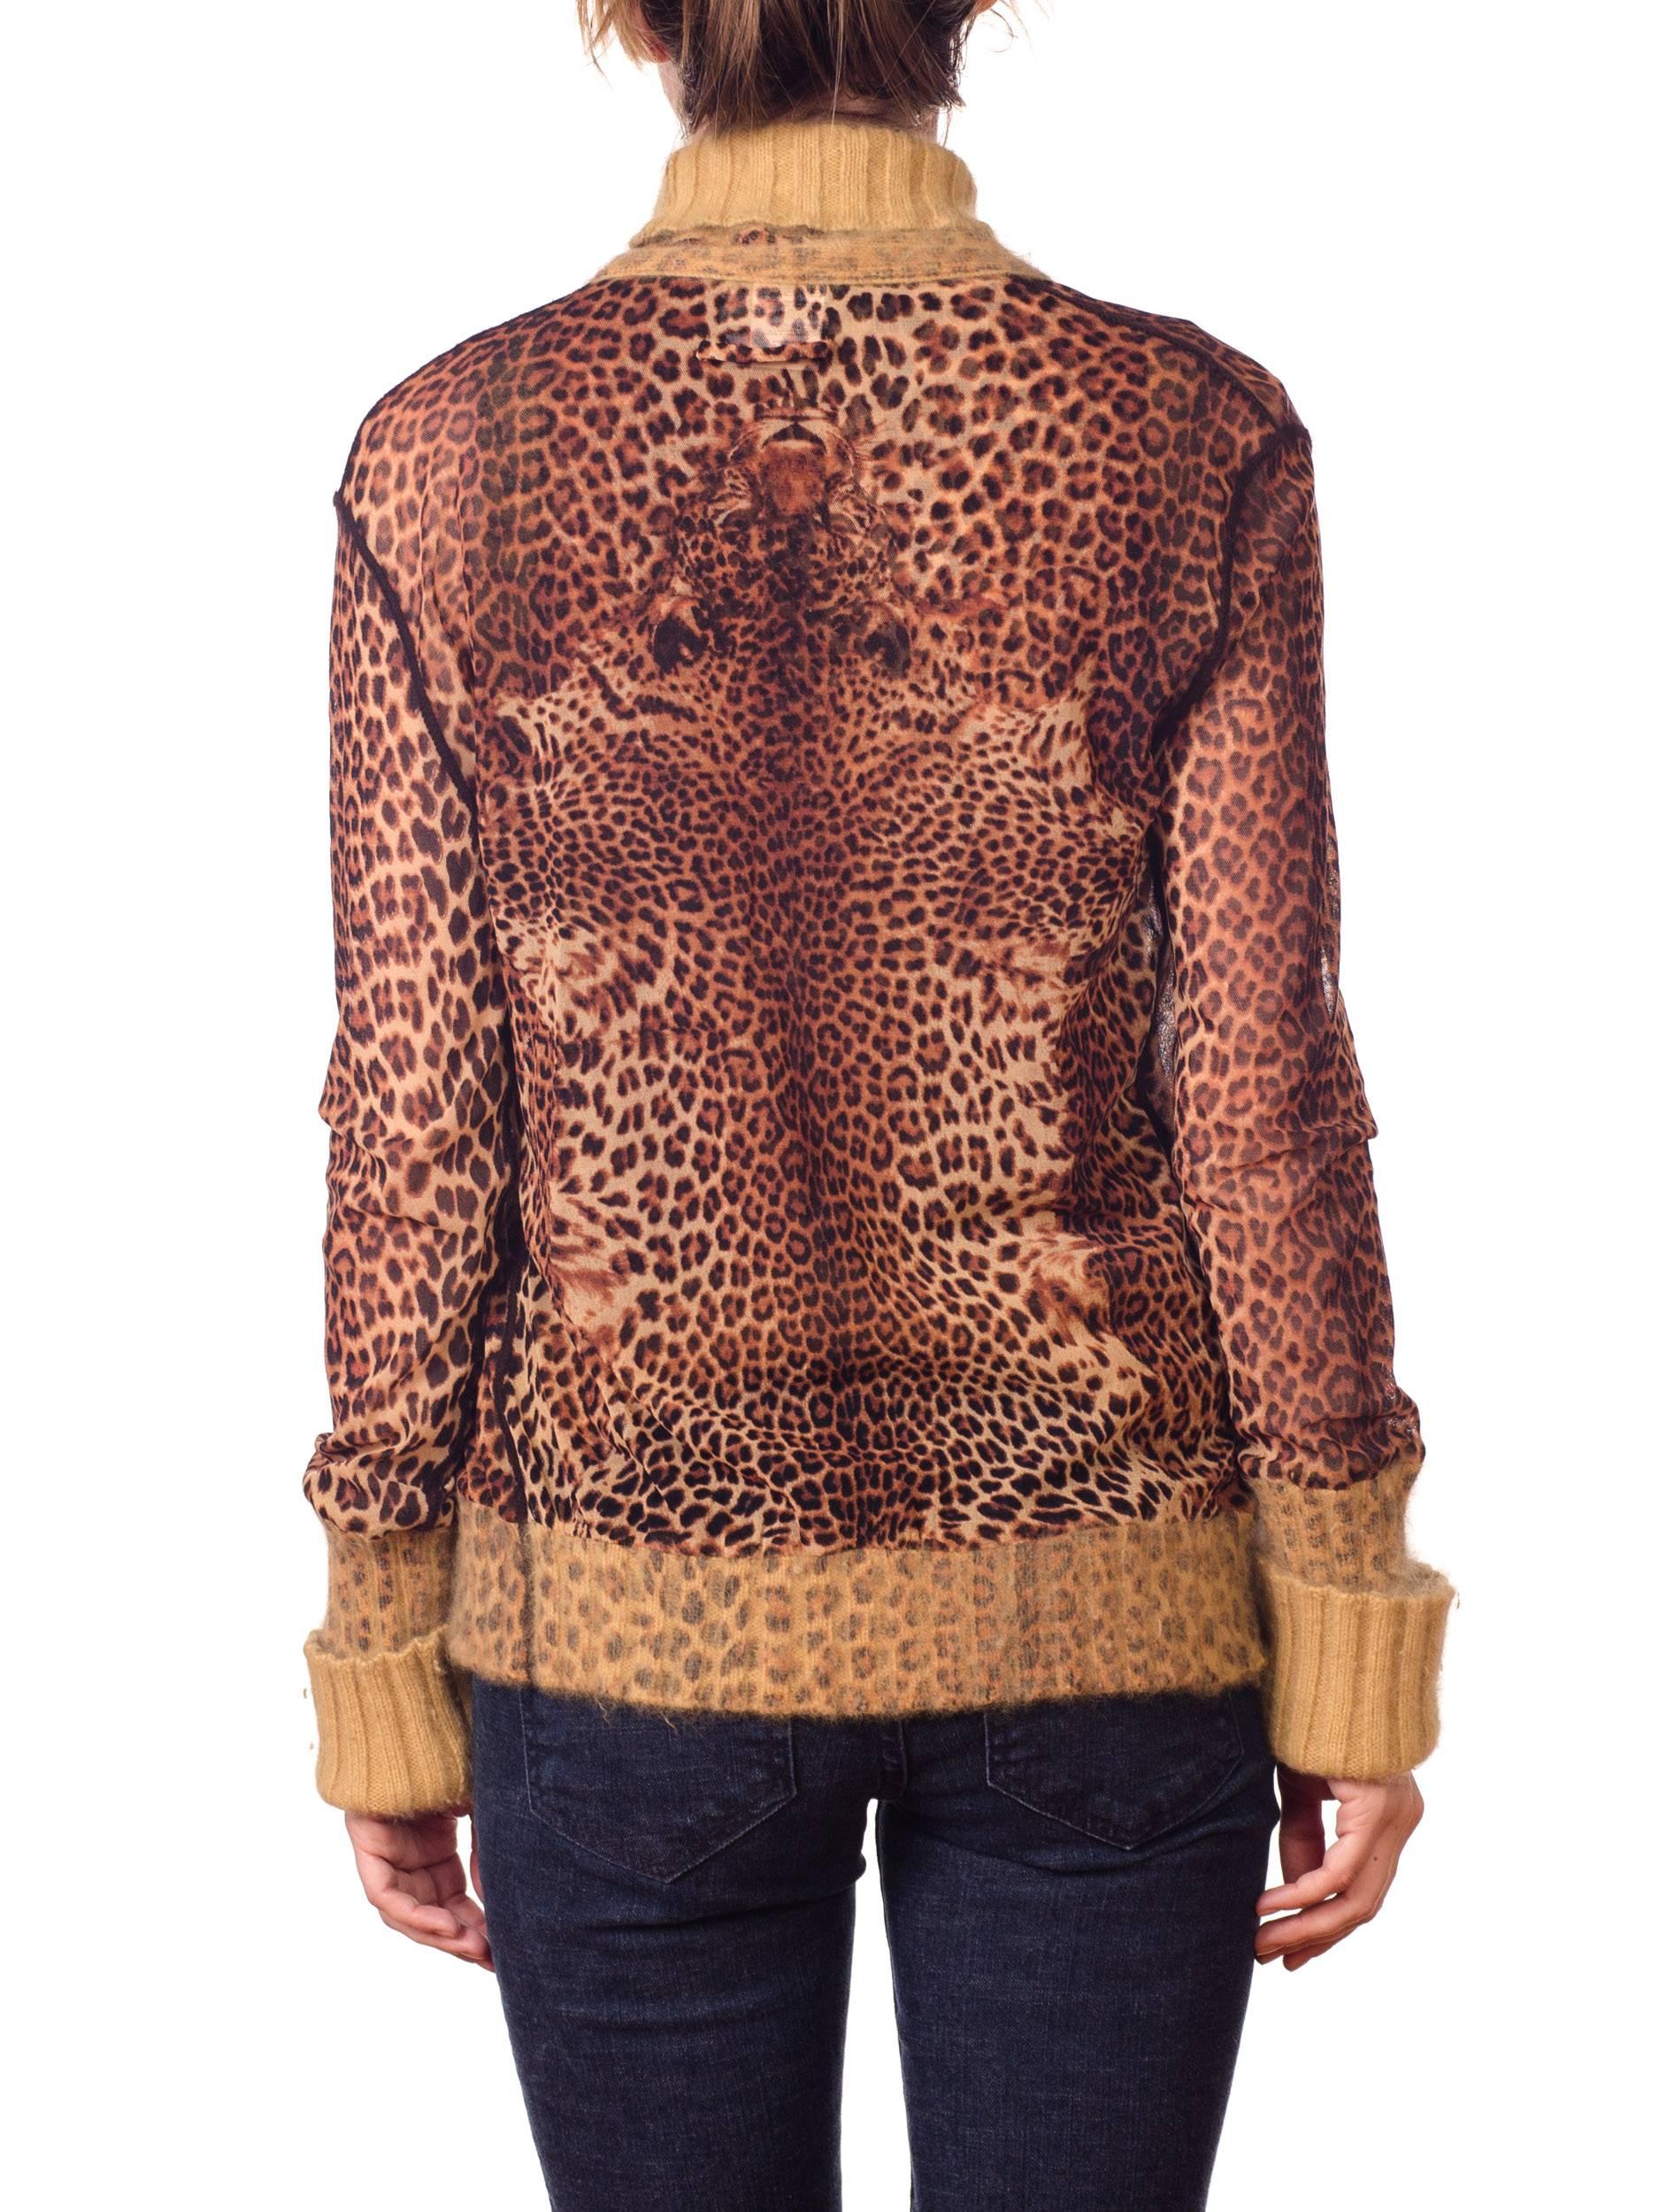 2000S JEAN PAUL GAULTIER Leopard Mesh Top And Cardigan Ensemble With Angora Trim 1